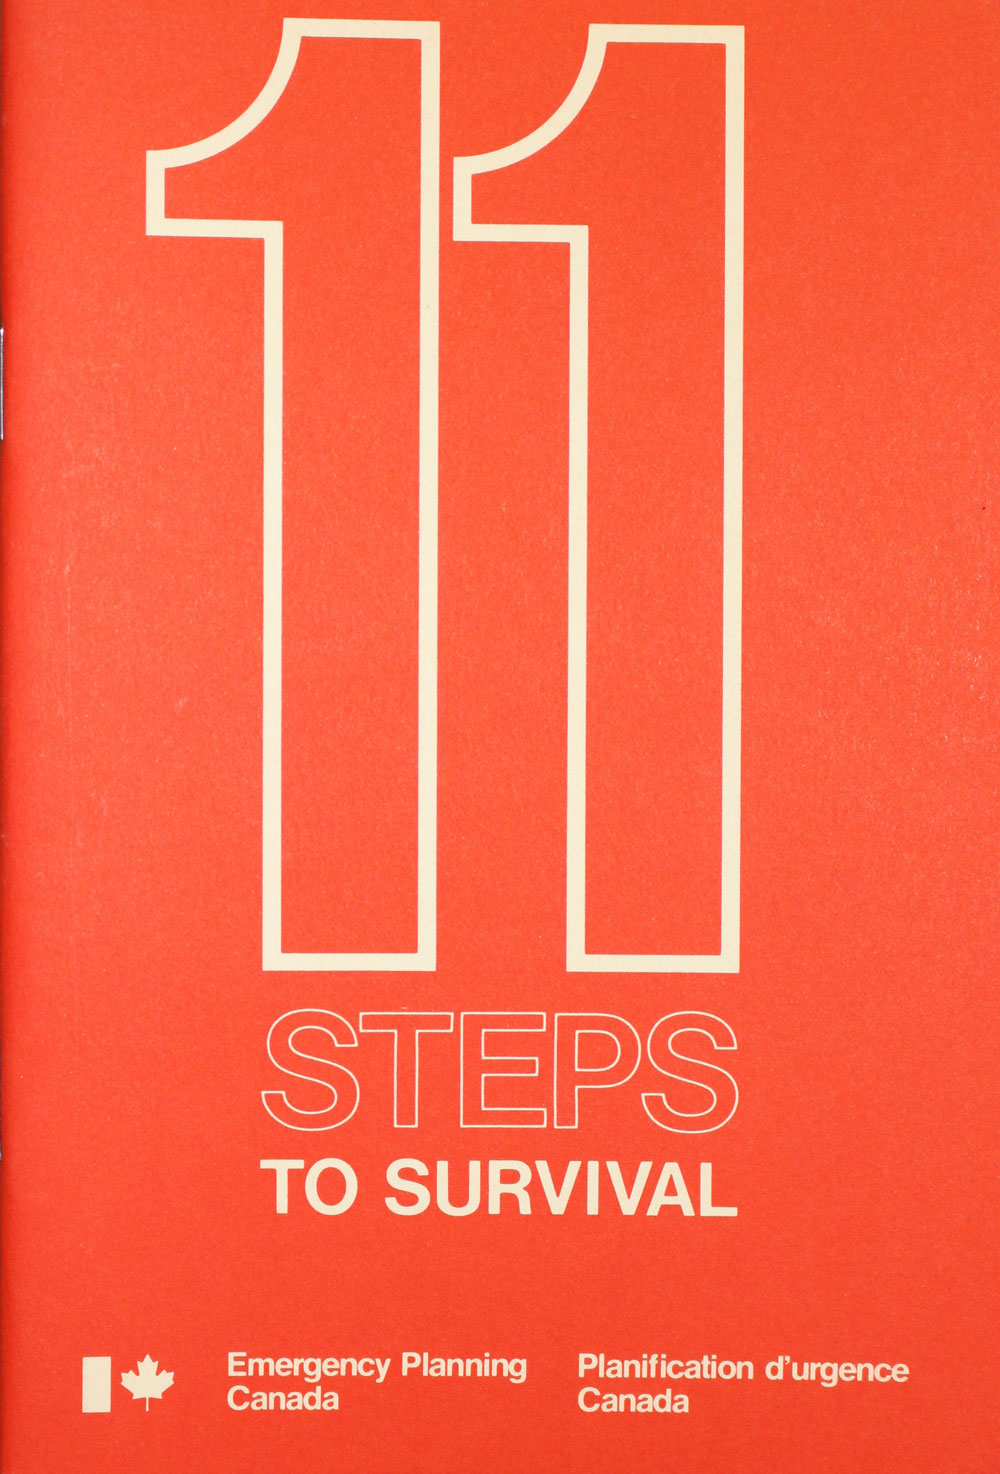 11 Steps to Survival